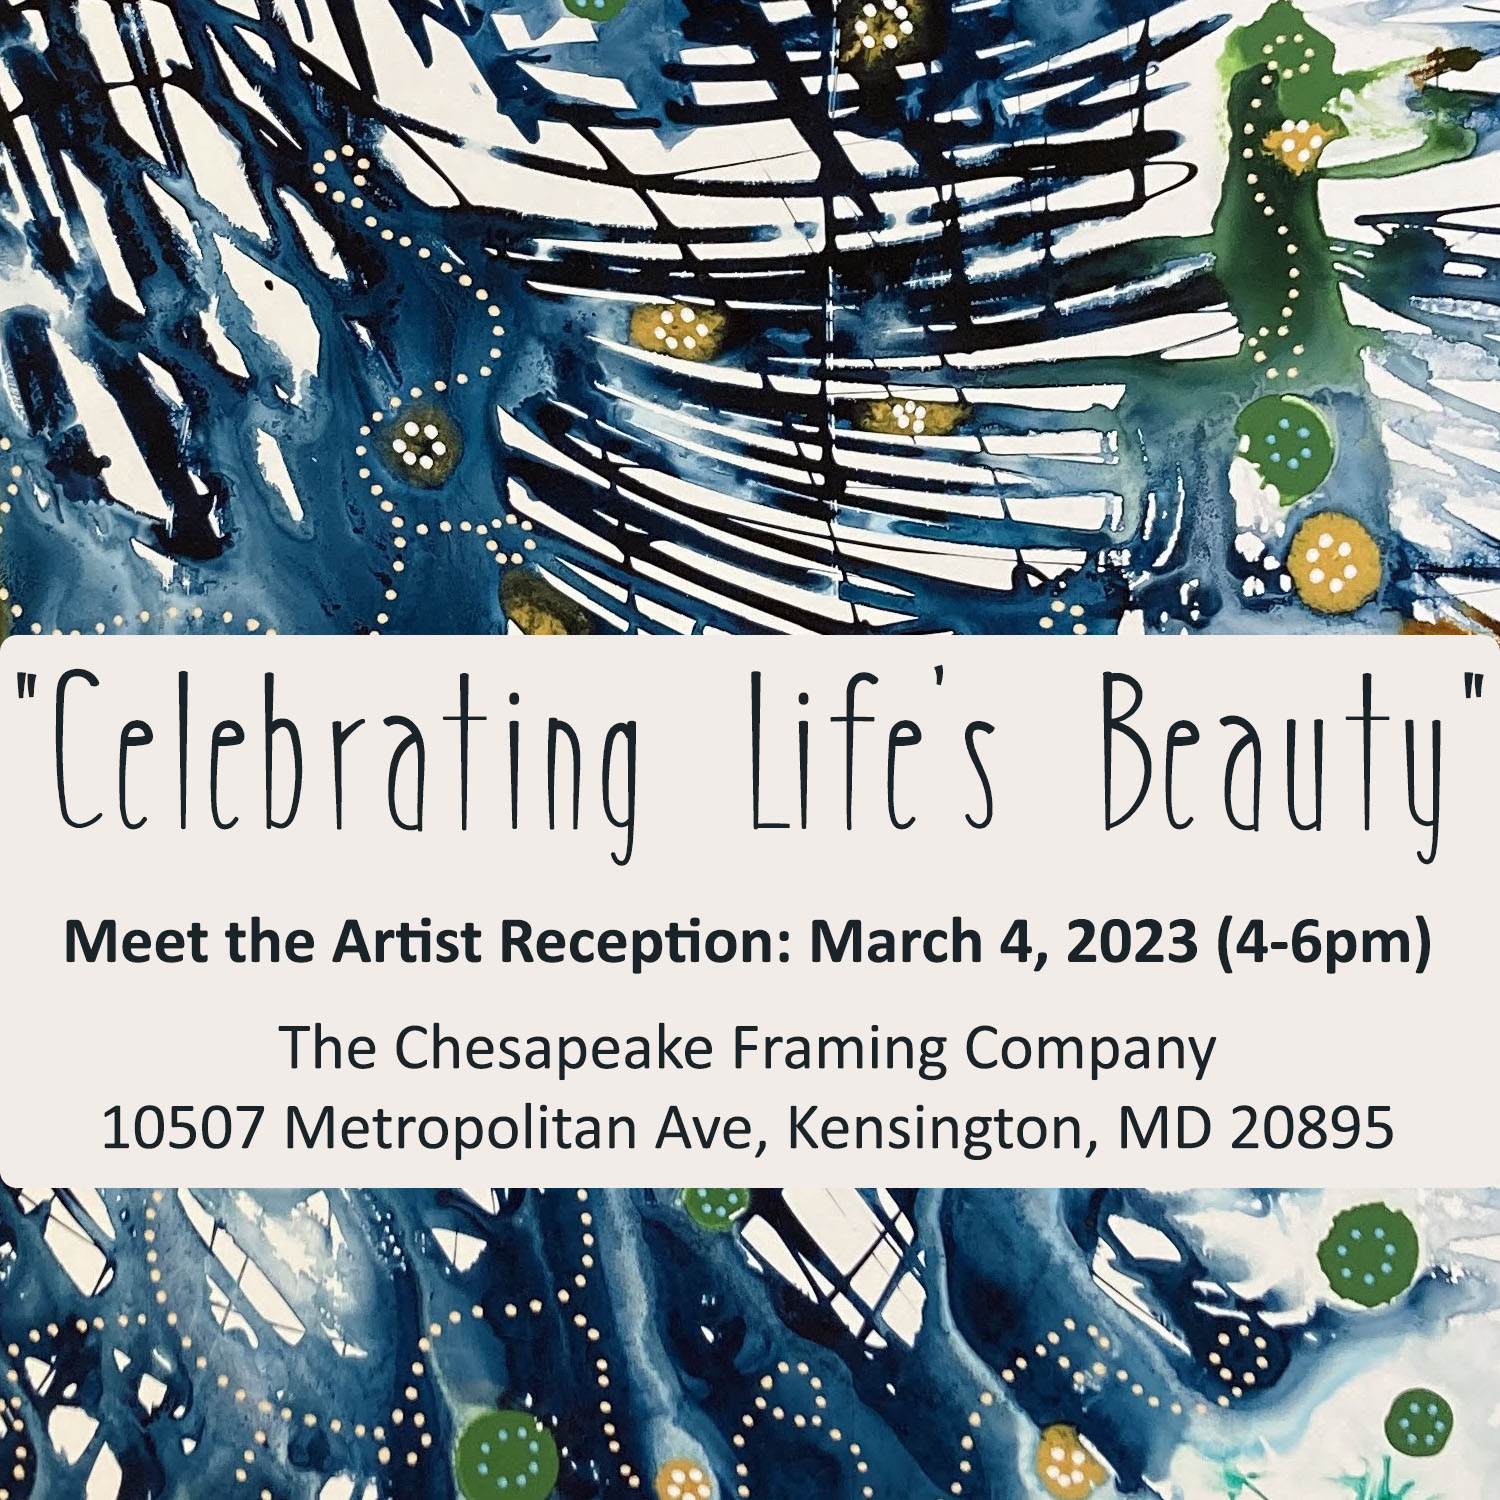 Celebrating Life's Beauty - Meet the Artist Reception on March 4, 2023 (4-6pm)